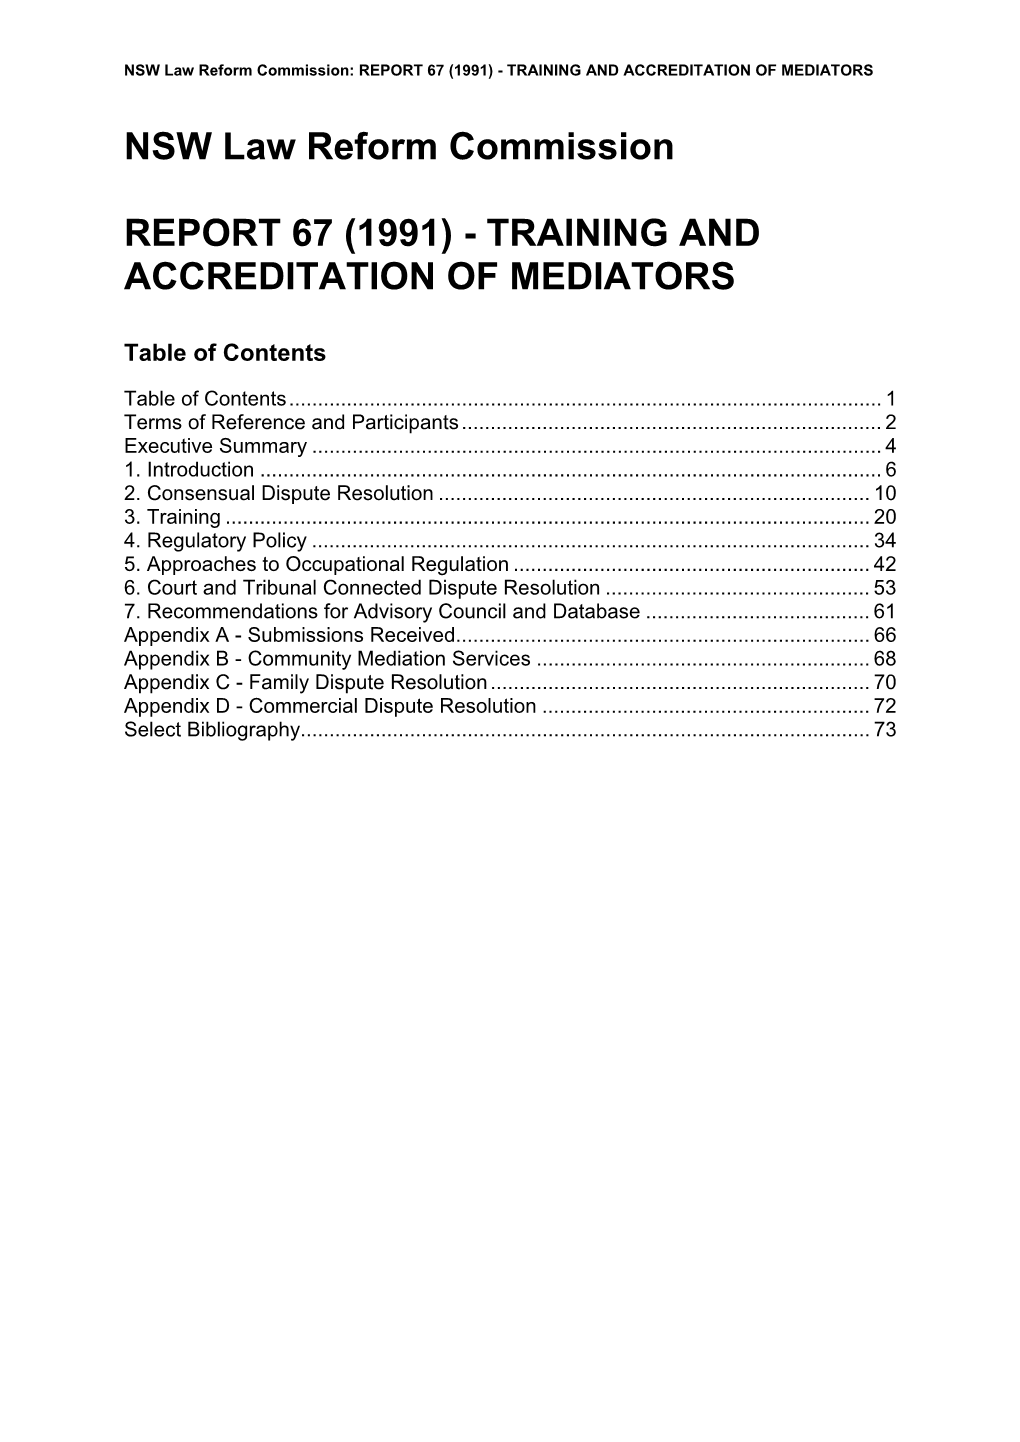 Report 67: Training and Accreditation of Mediators